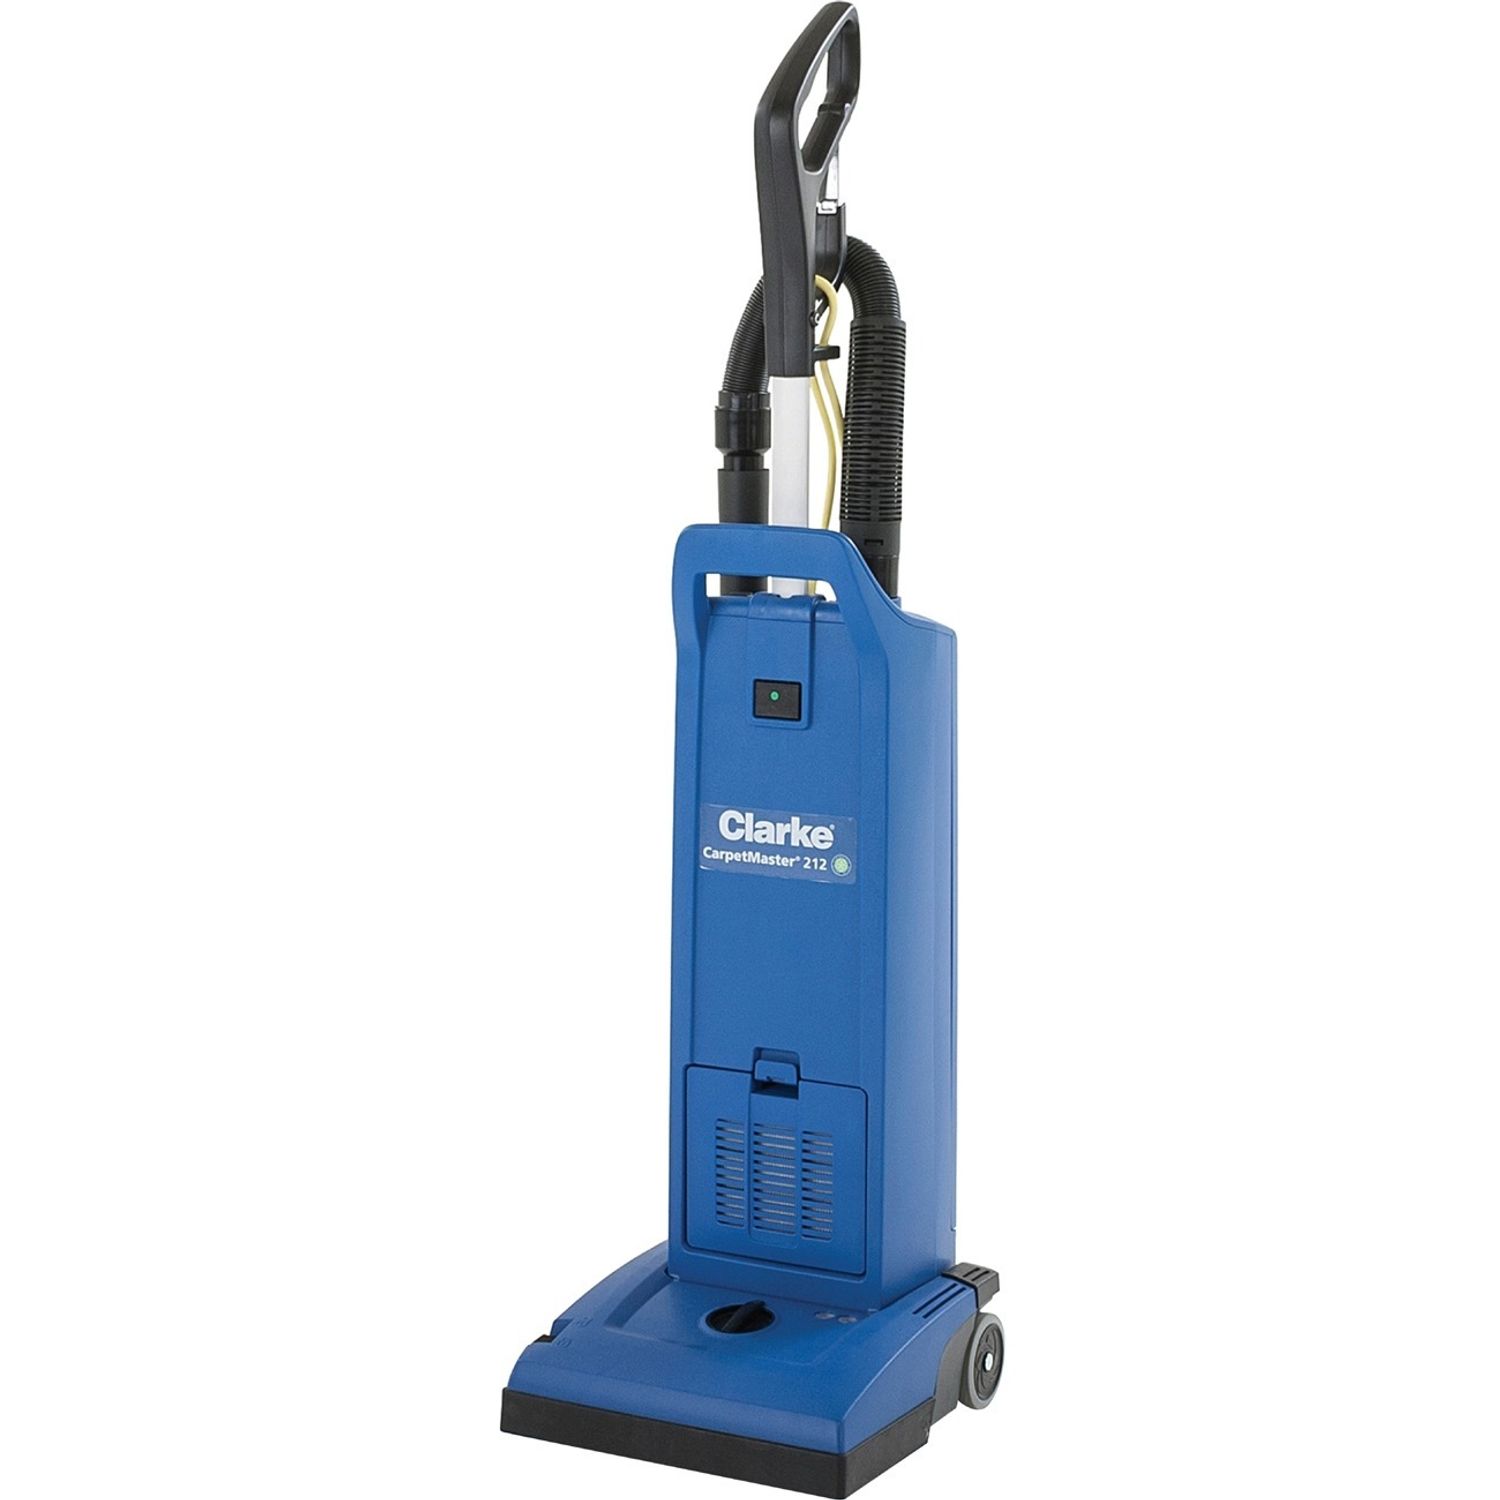 CarpetMaster 212 120/1/60 Upright Vacuum 1000 W Motor, 1.05 gal, Bagged, Brush, Hose, Wand, Crevice Tool, Upholstery Tool, 11.50" Cleaning Width, Carpet, Rug, 50 ft Cable Length, HEPA, 695.7 gal/min